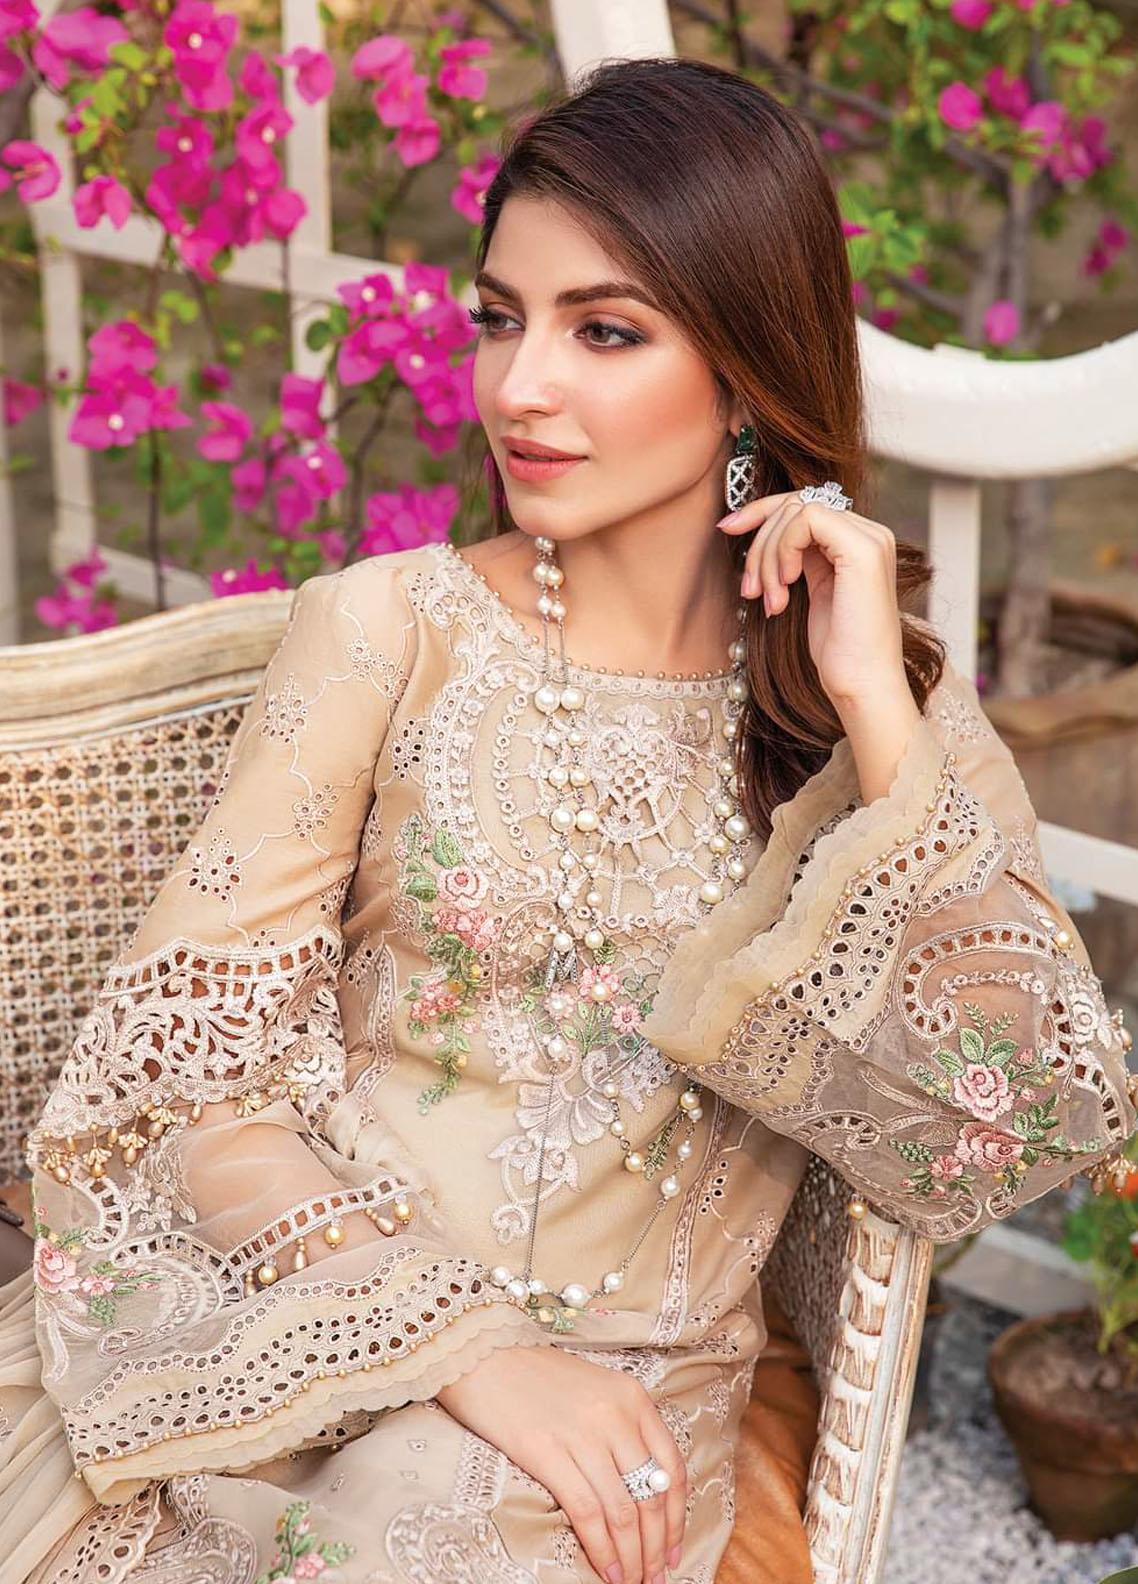 Maria B Embroidered Lawn Suit Unstitched 3 Piece 06 MBEL22 – Eid Collection